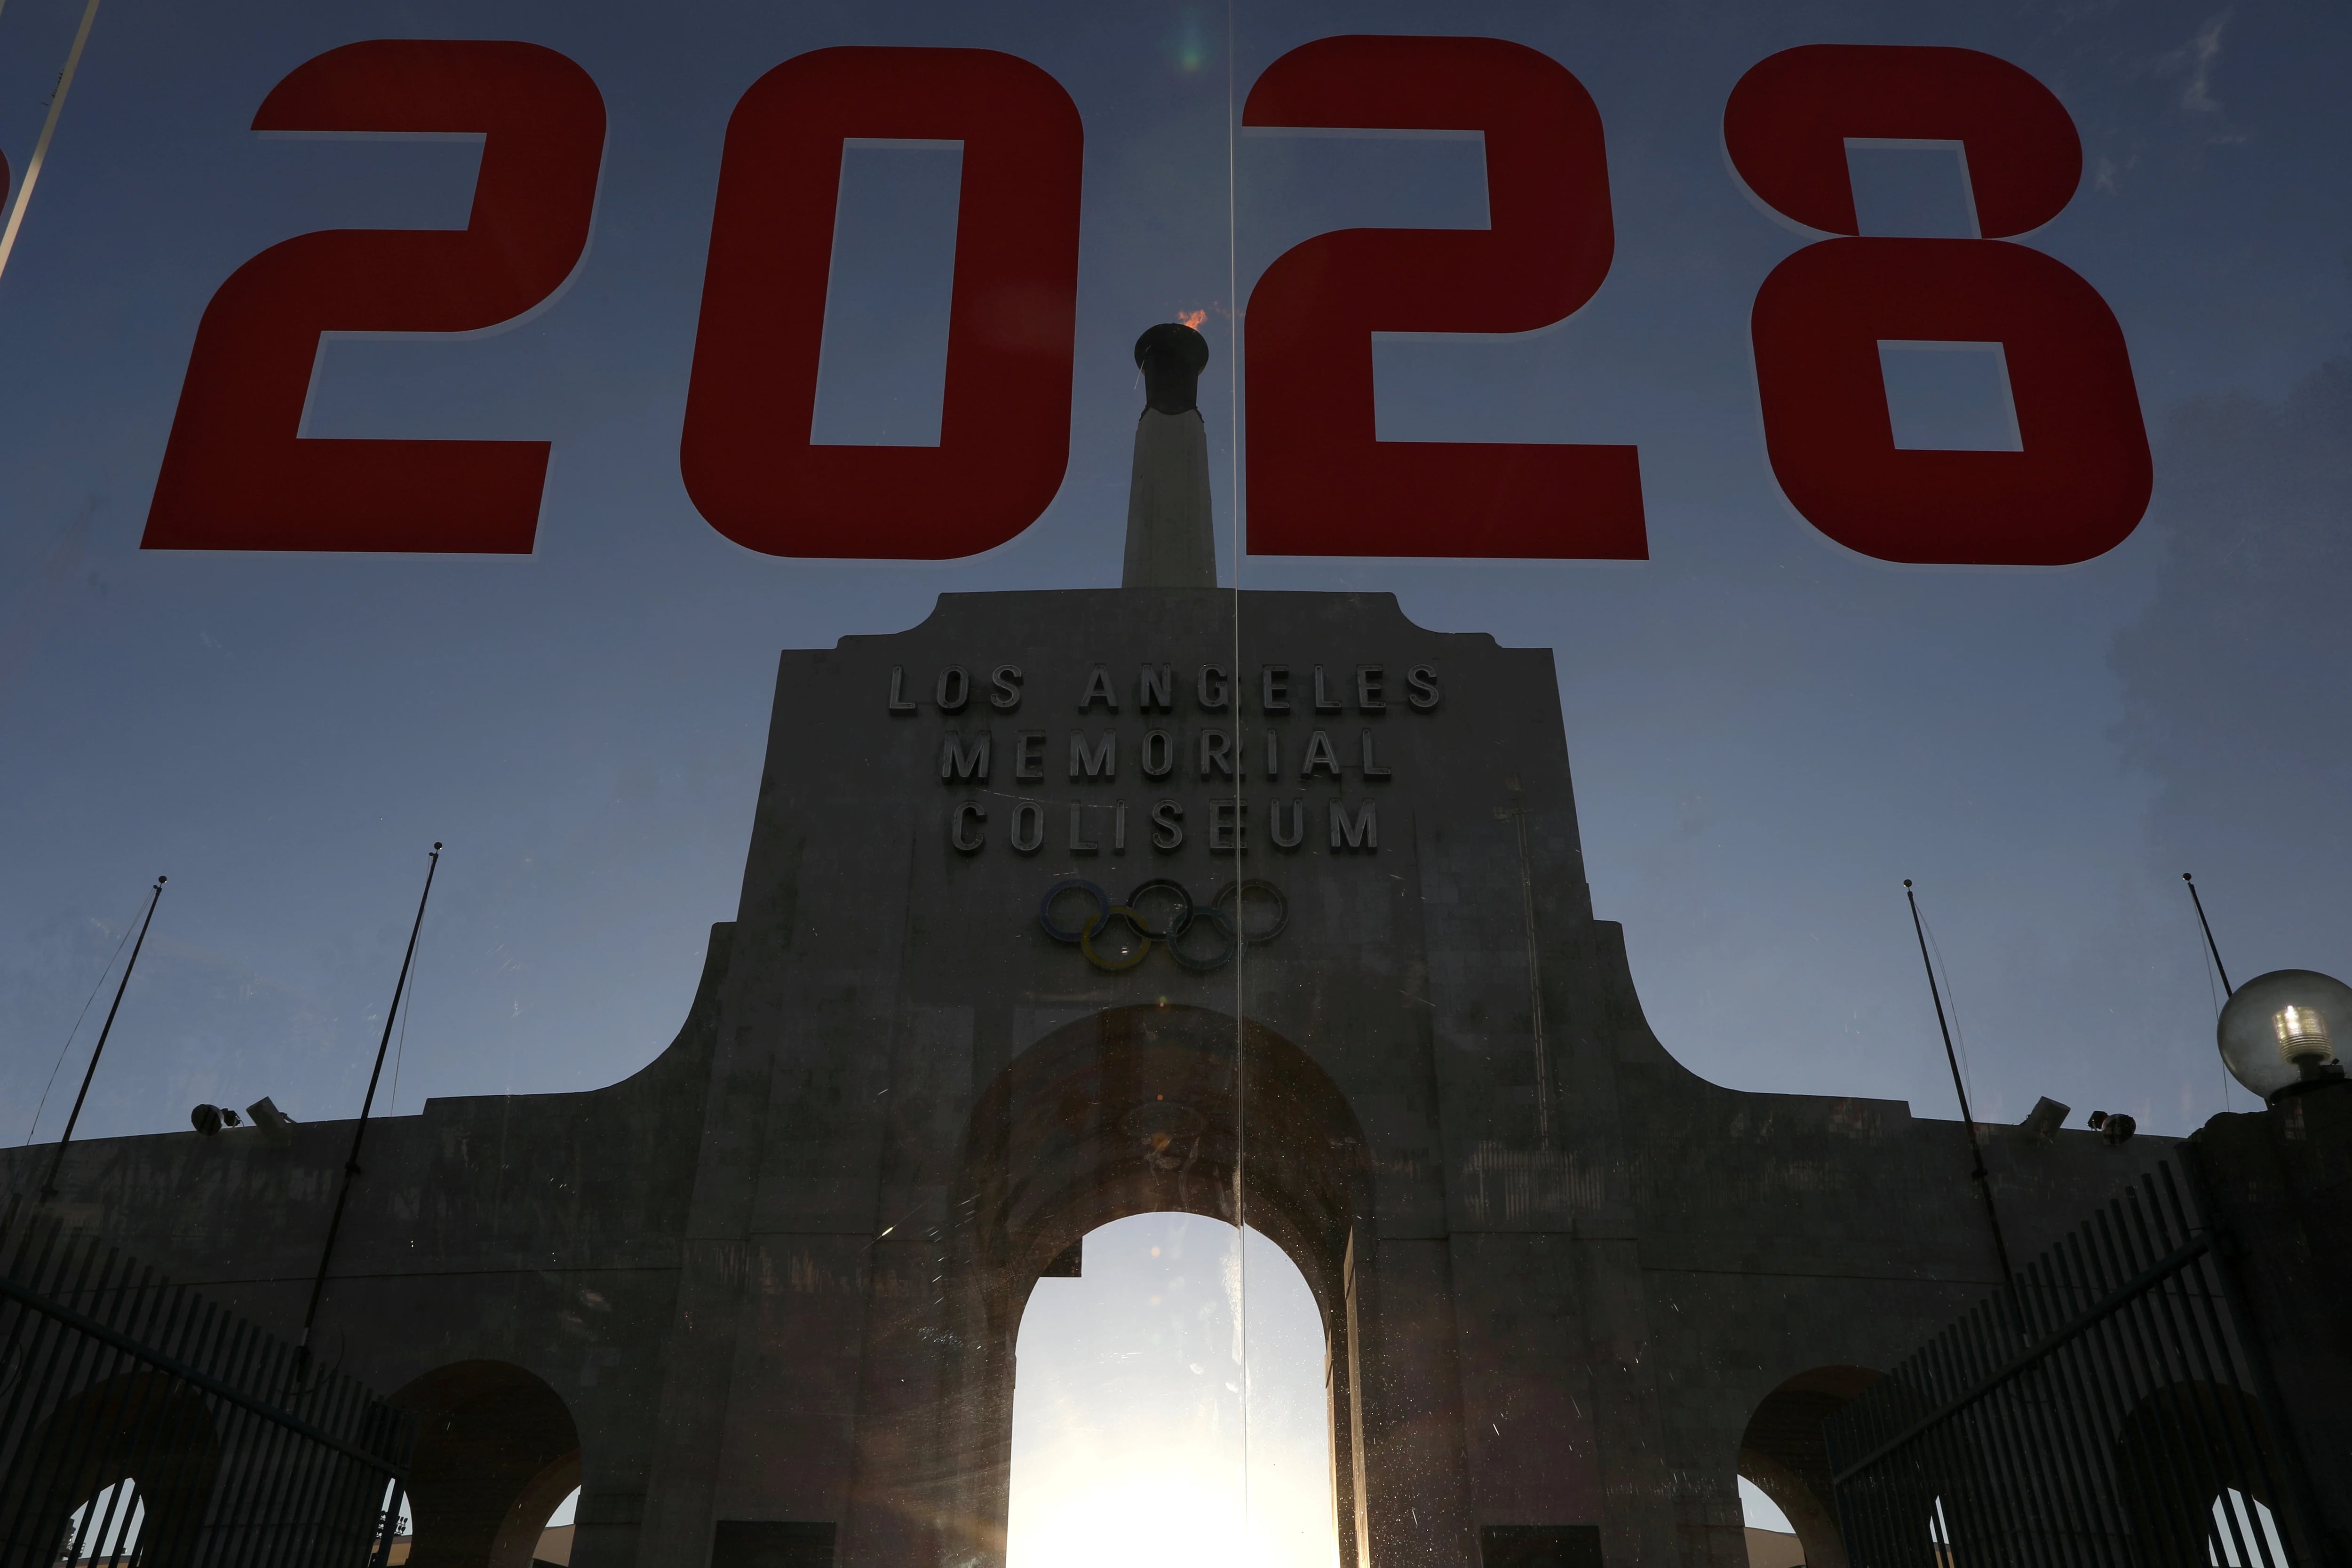 USOPC sees ‘pathway forward’ for certain sports to rejoin LA28 program